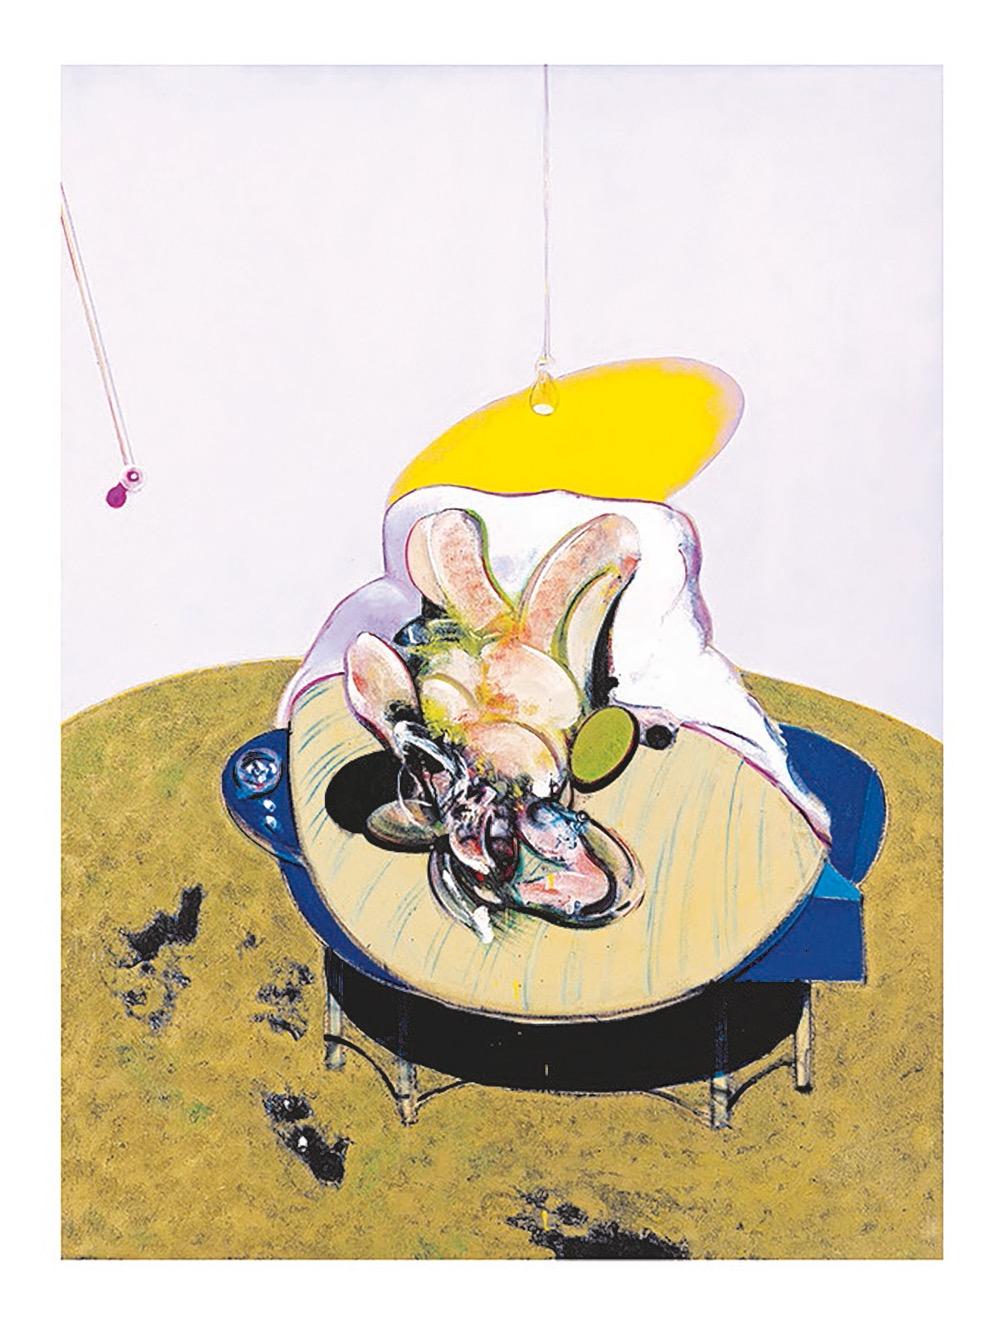 Francis Bacon
Lying Figure, 2018
5-color frequency-modulated print on 260g Rives paper
31 1/2 × 23 3/5 in | 80 × 60 cm
Edition of 1000